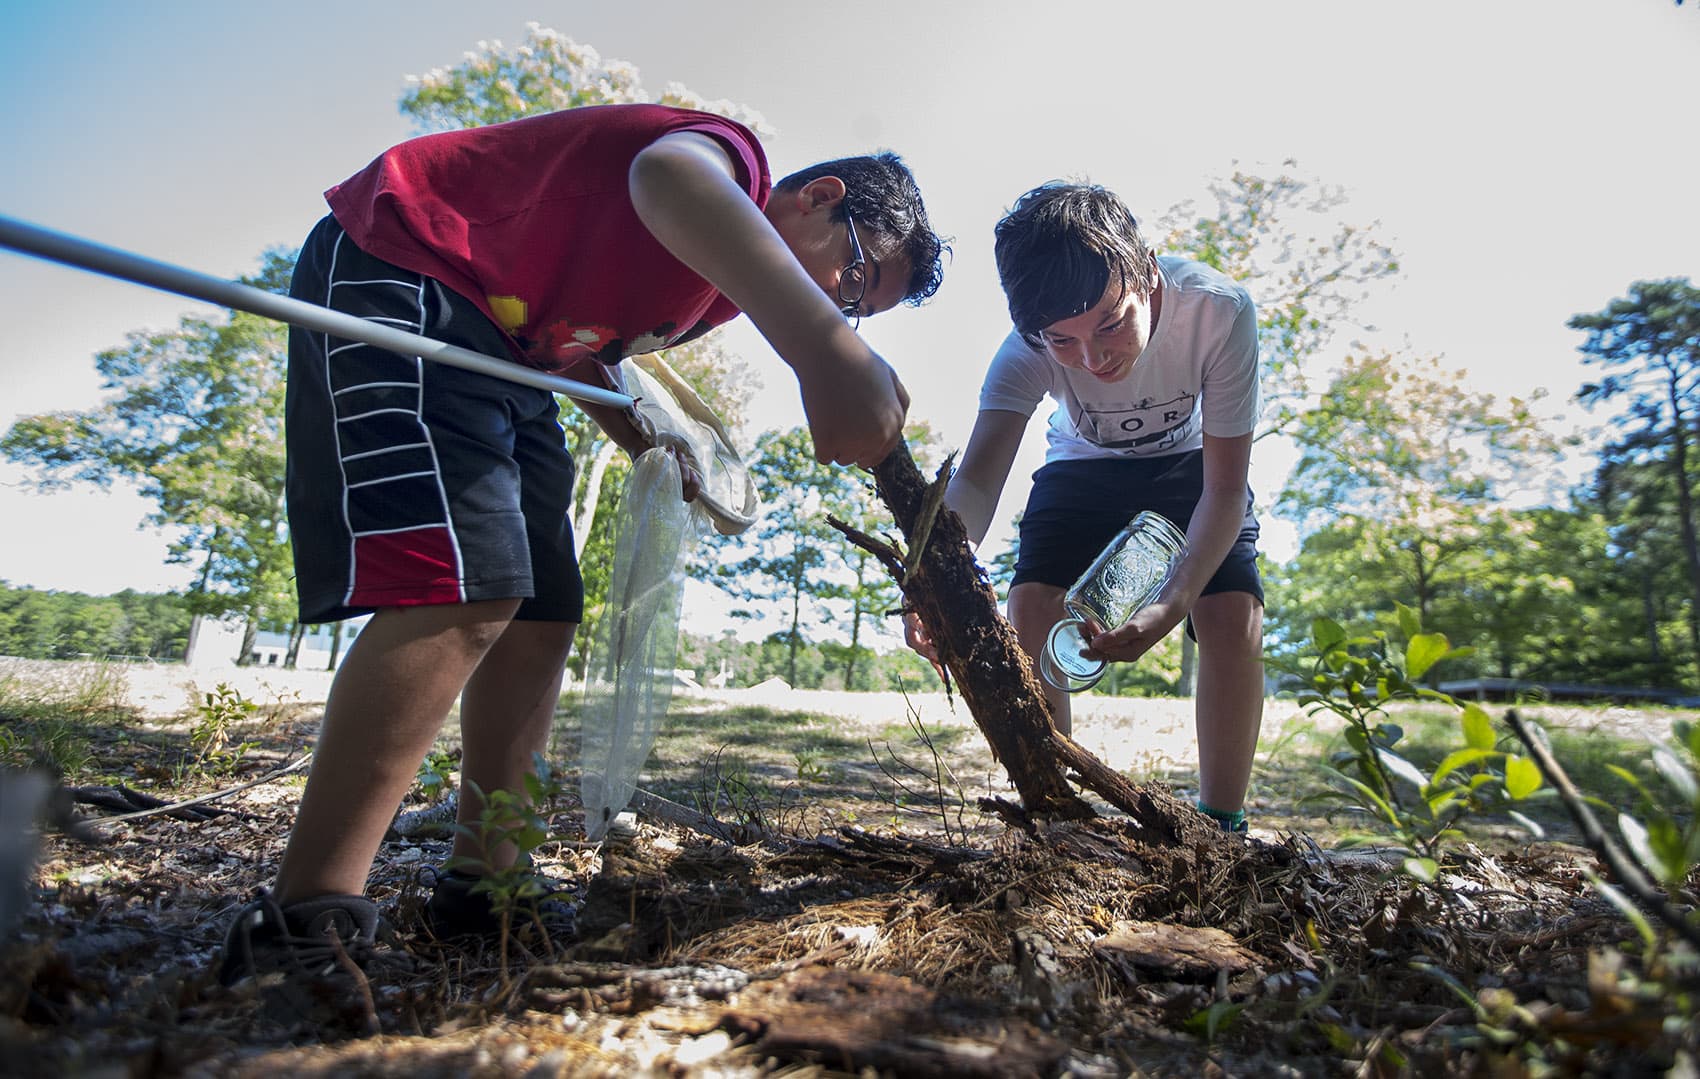 Isaiah Peters, 11, and Angel Peters, 13, lift a branch out of the ground looking for bugs to collect at the Mashpee Wampanoag science camp program. (Jesse Costa/WBUR)